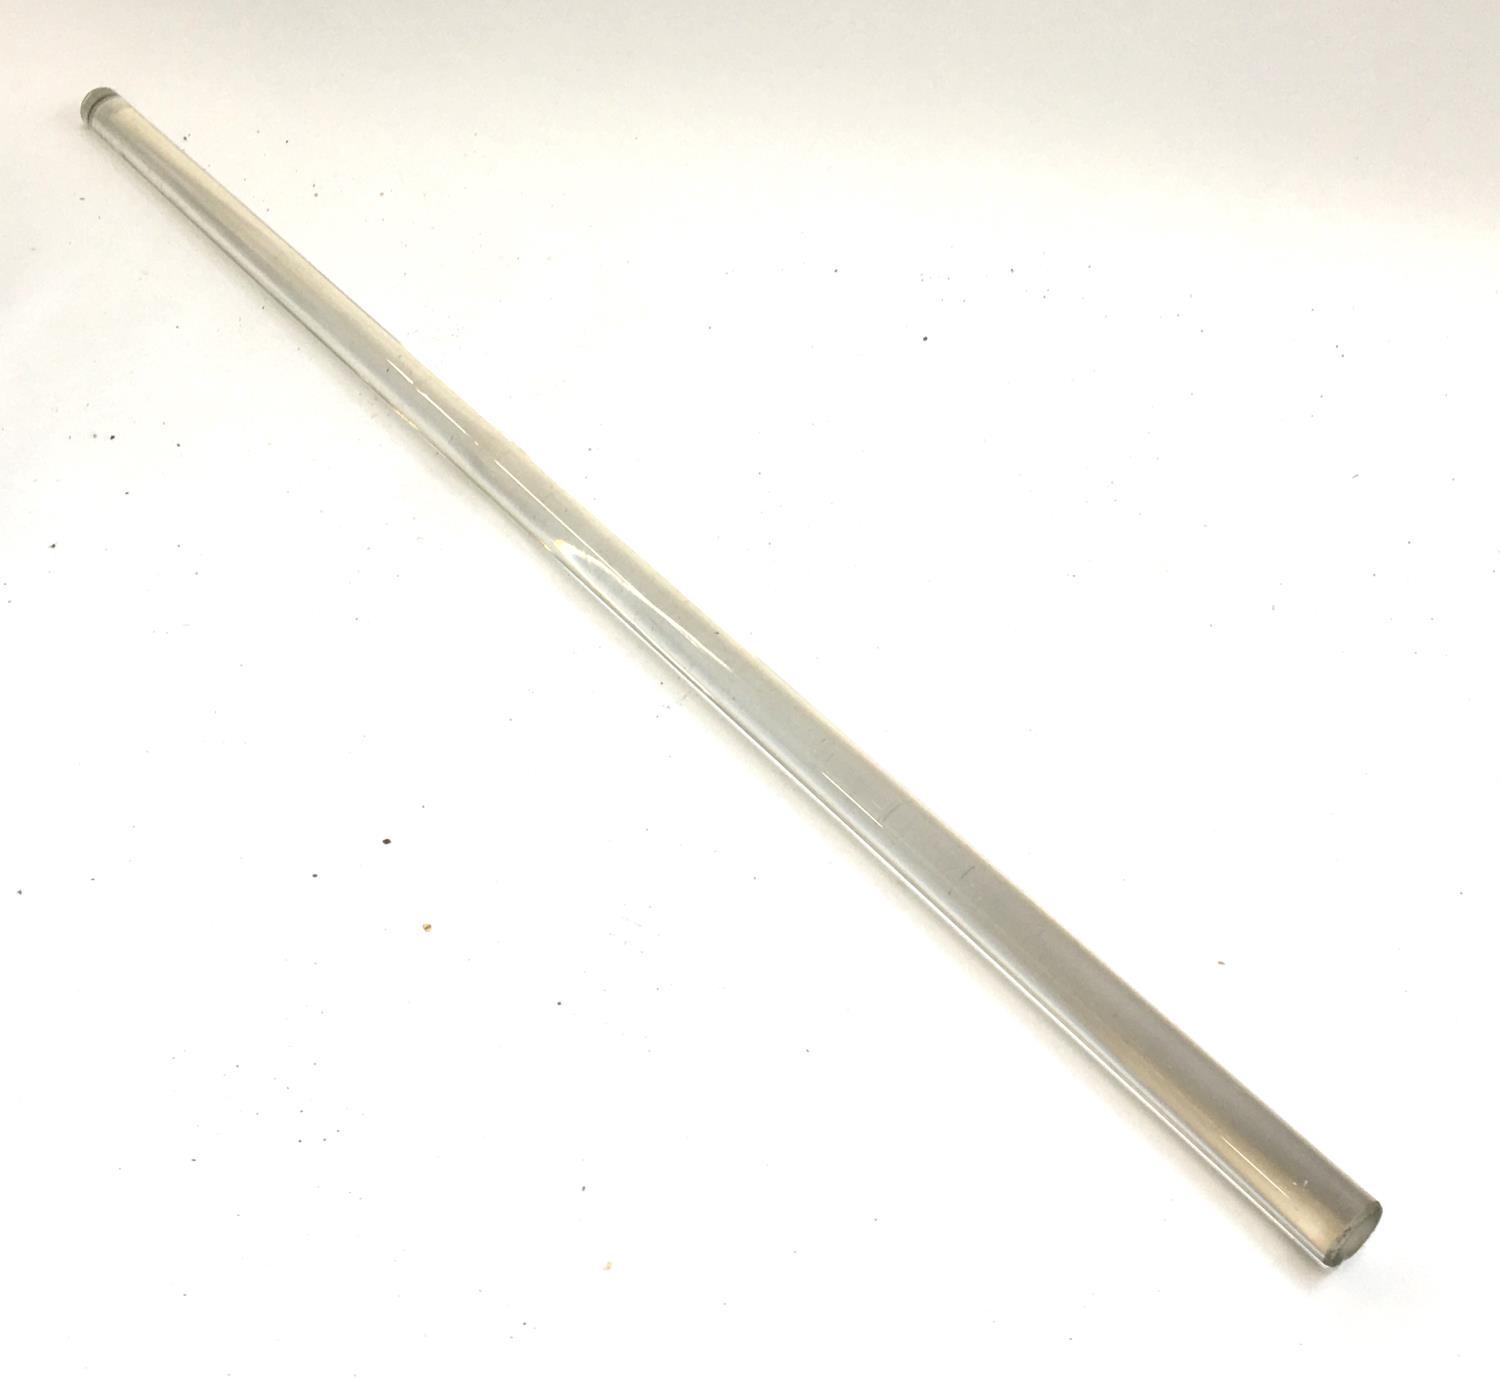 A long glass rod, possibly a ledger magnifier or desk rule